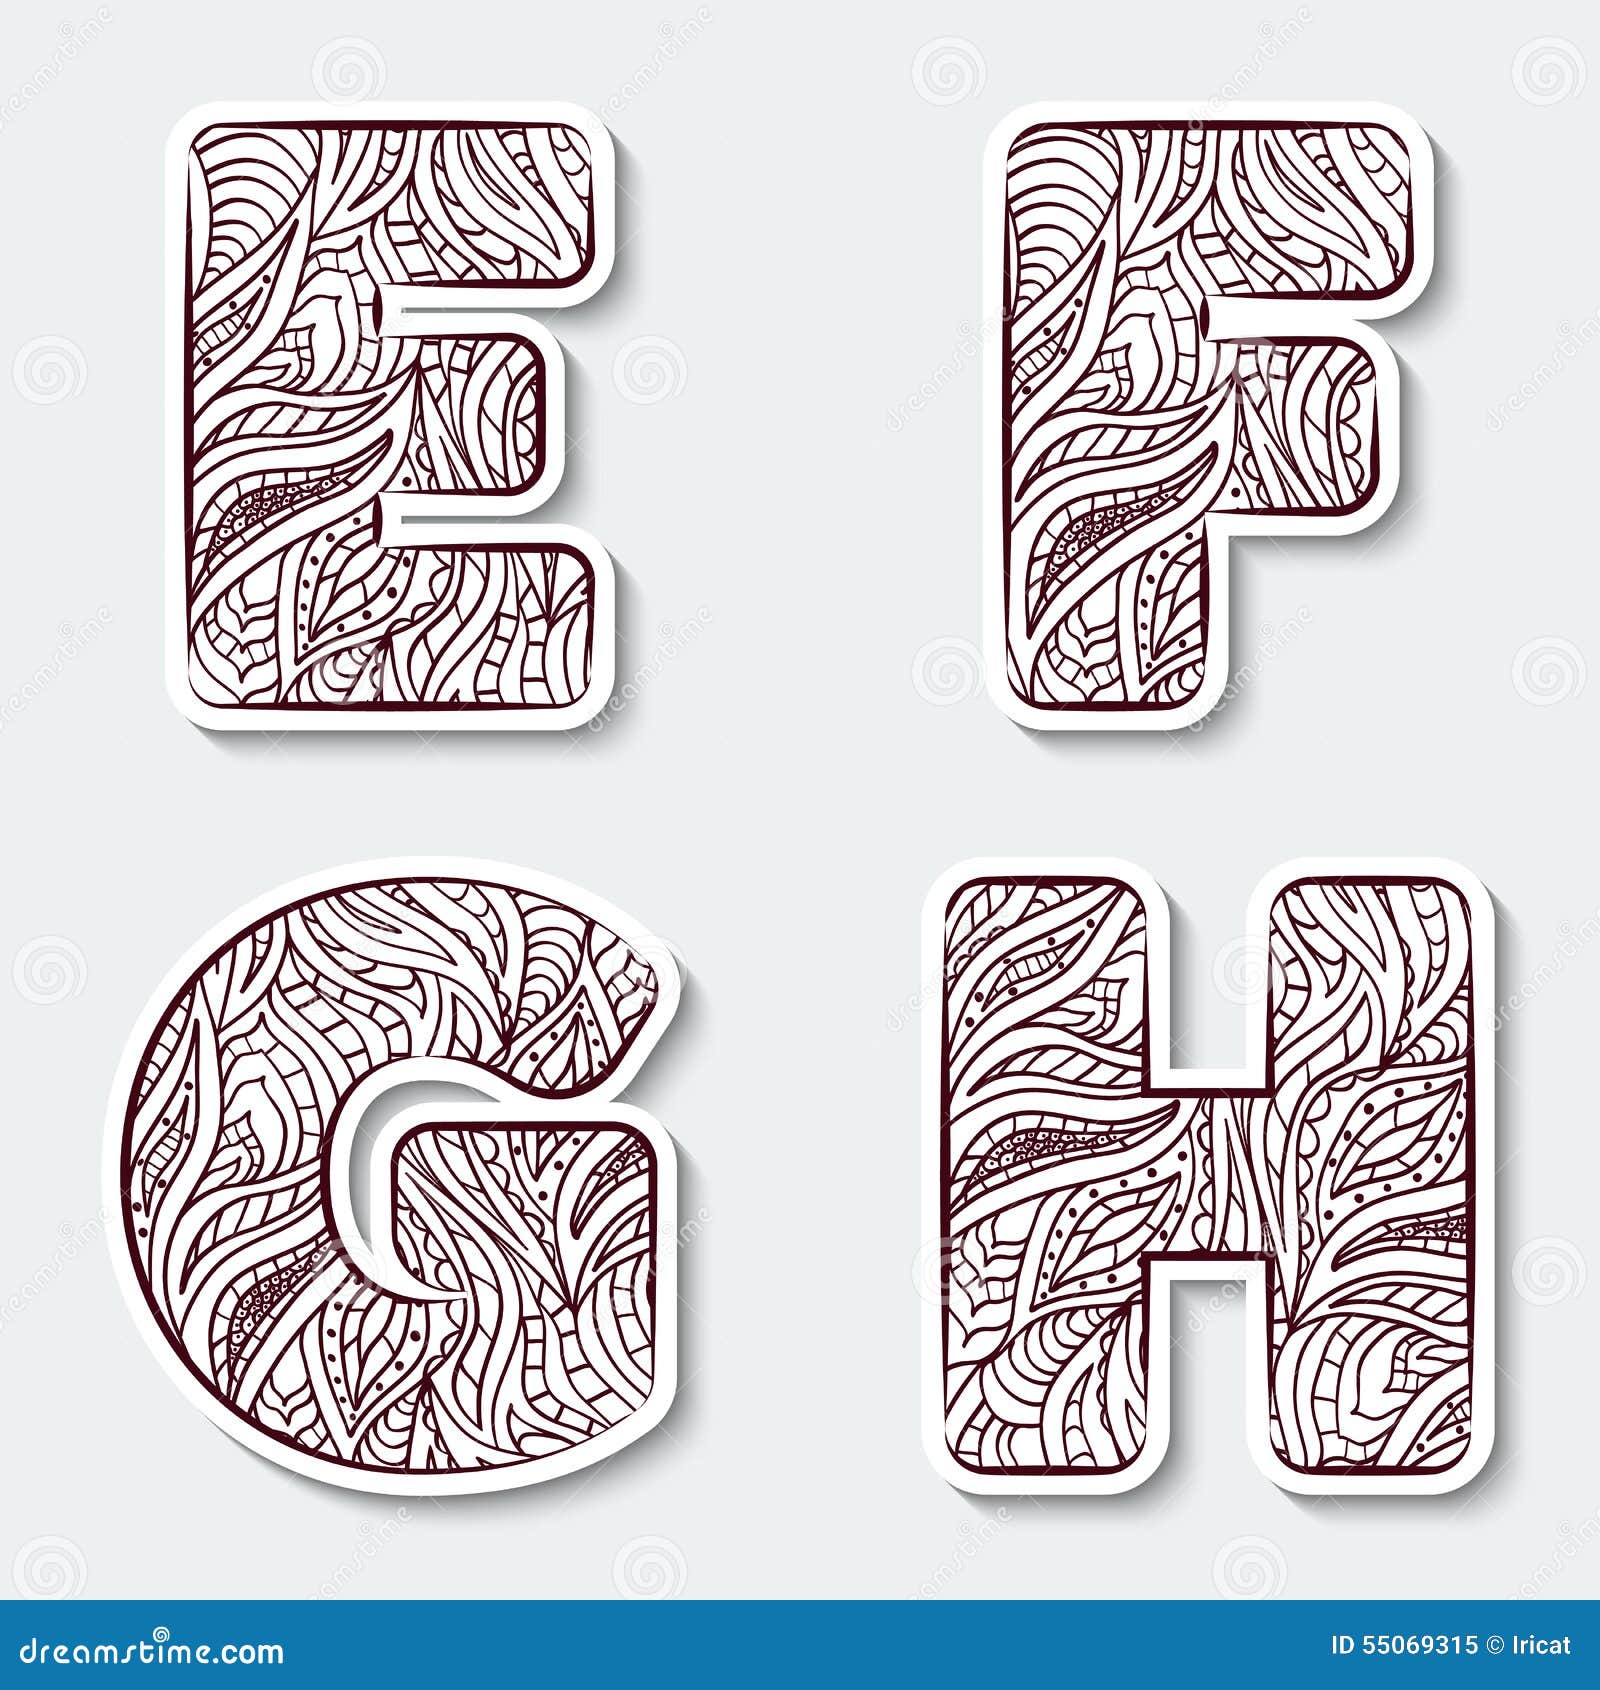 Set Of Capital Letters E, F, G, H From The Alphabet With ...